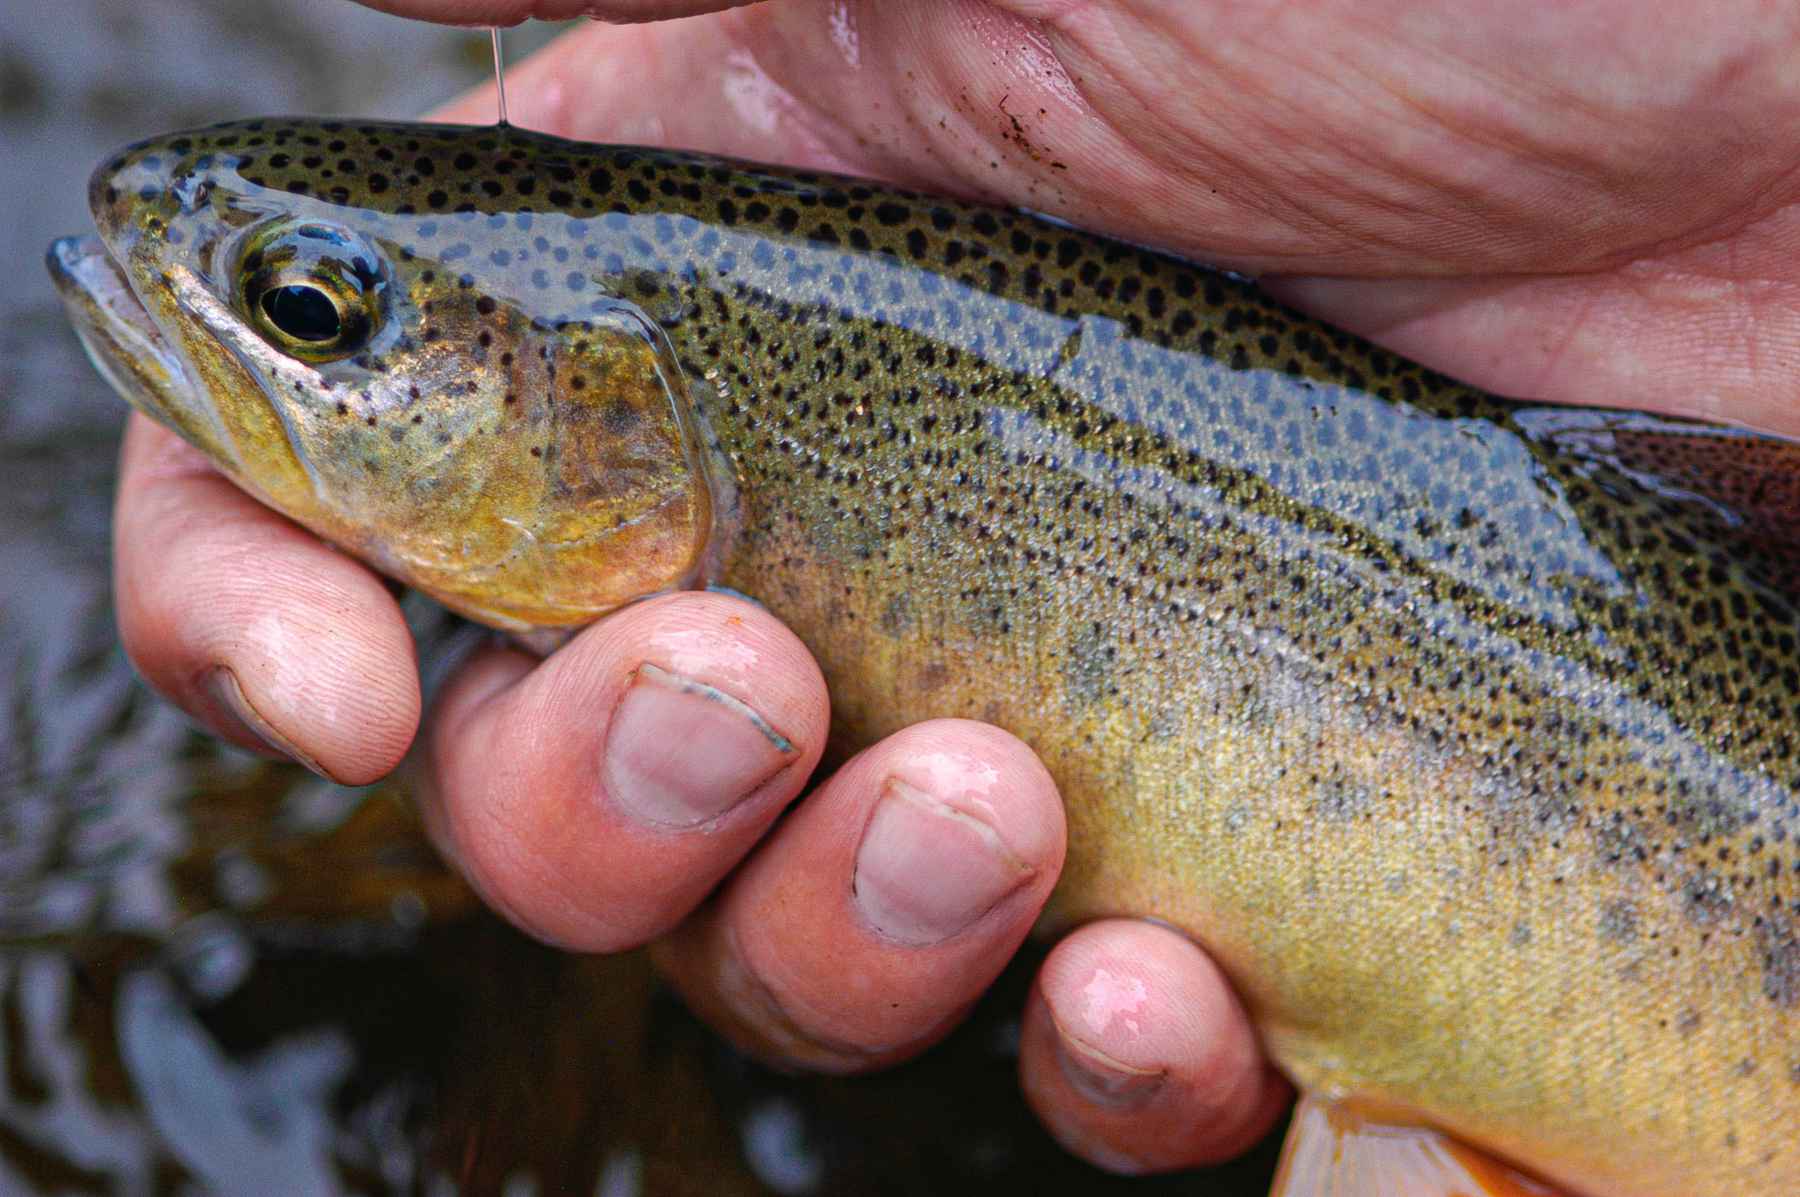 http://www.hatchmag.com/sites/default/files/styles/extra-large/public/field/image/Gila-trout-3.jpg